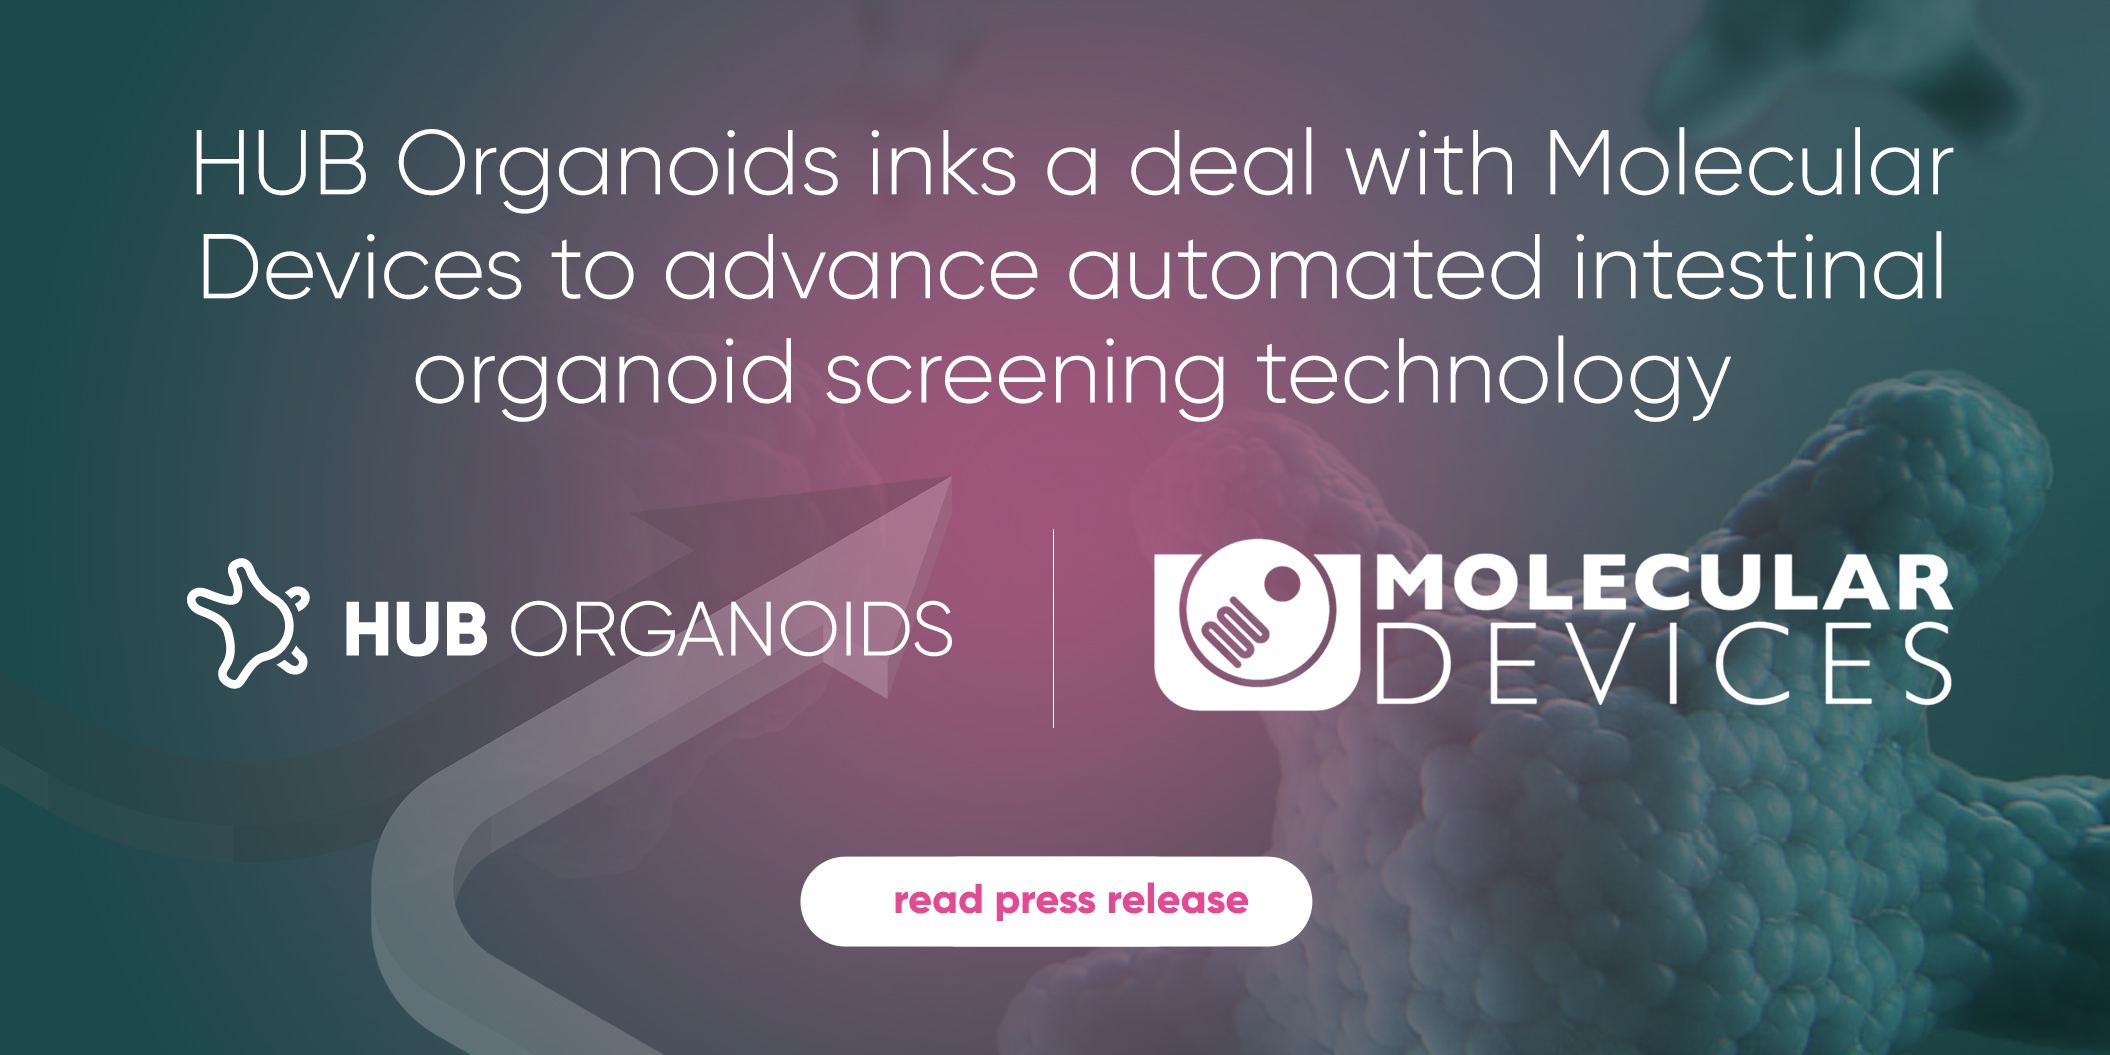 HUB Organoids extends partnership with Molecular Devices to advance automated intestinal organoid screening technology